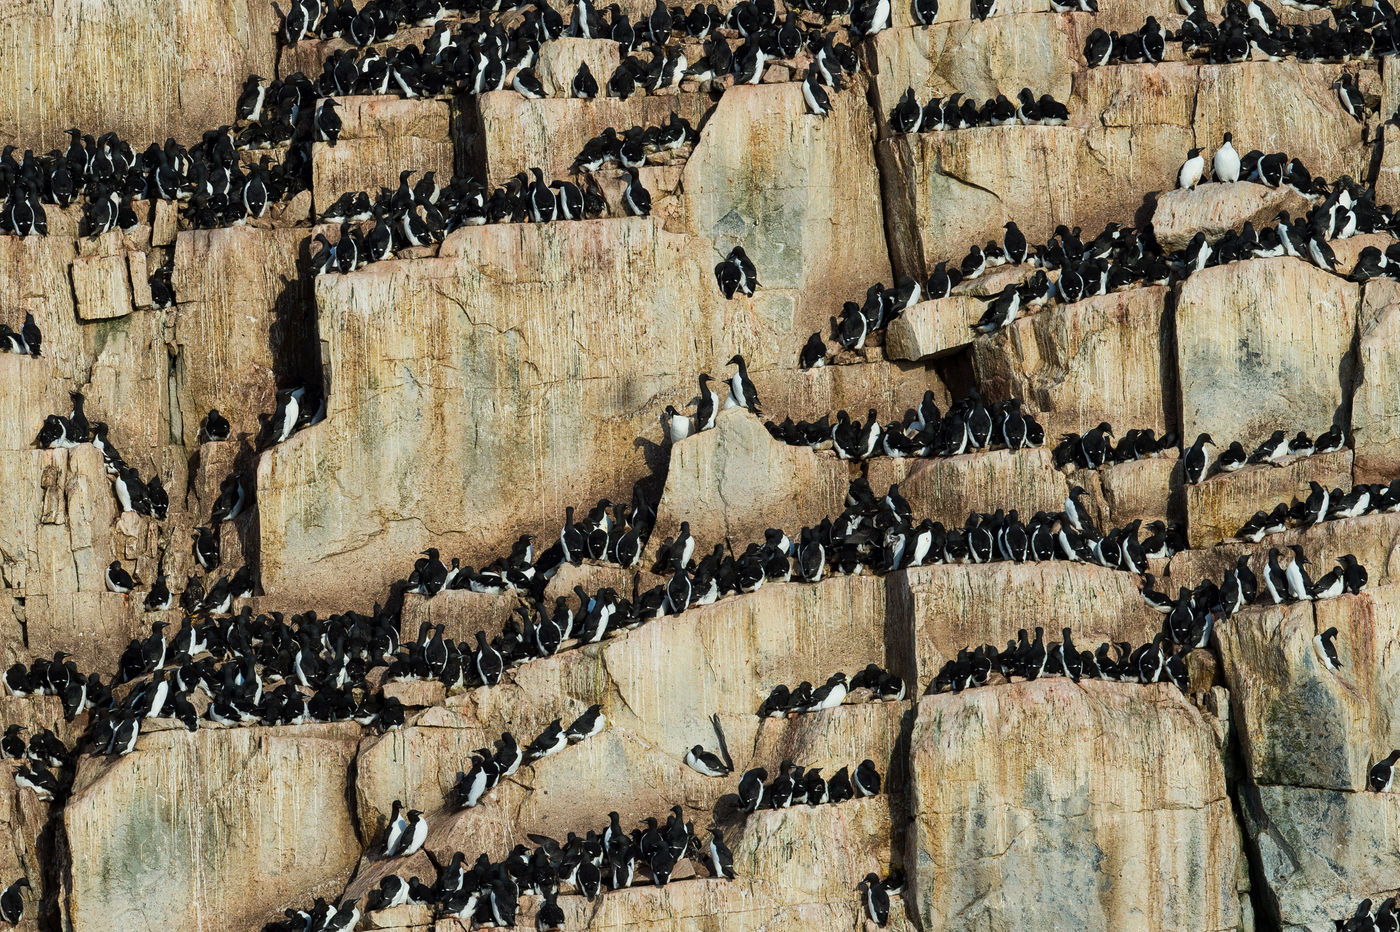 Brünnich's guillemots are packed on the steep cliffs. © David 'Billy' Herman